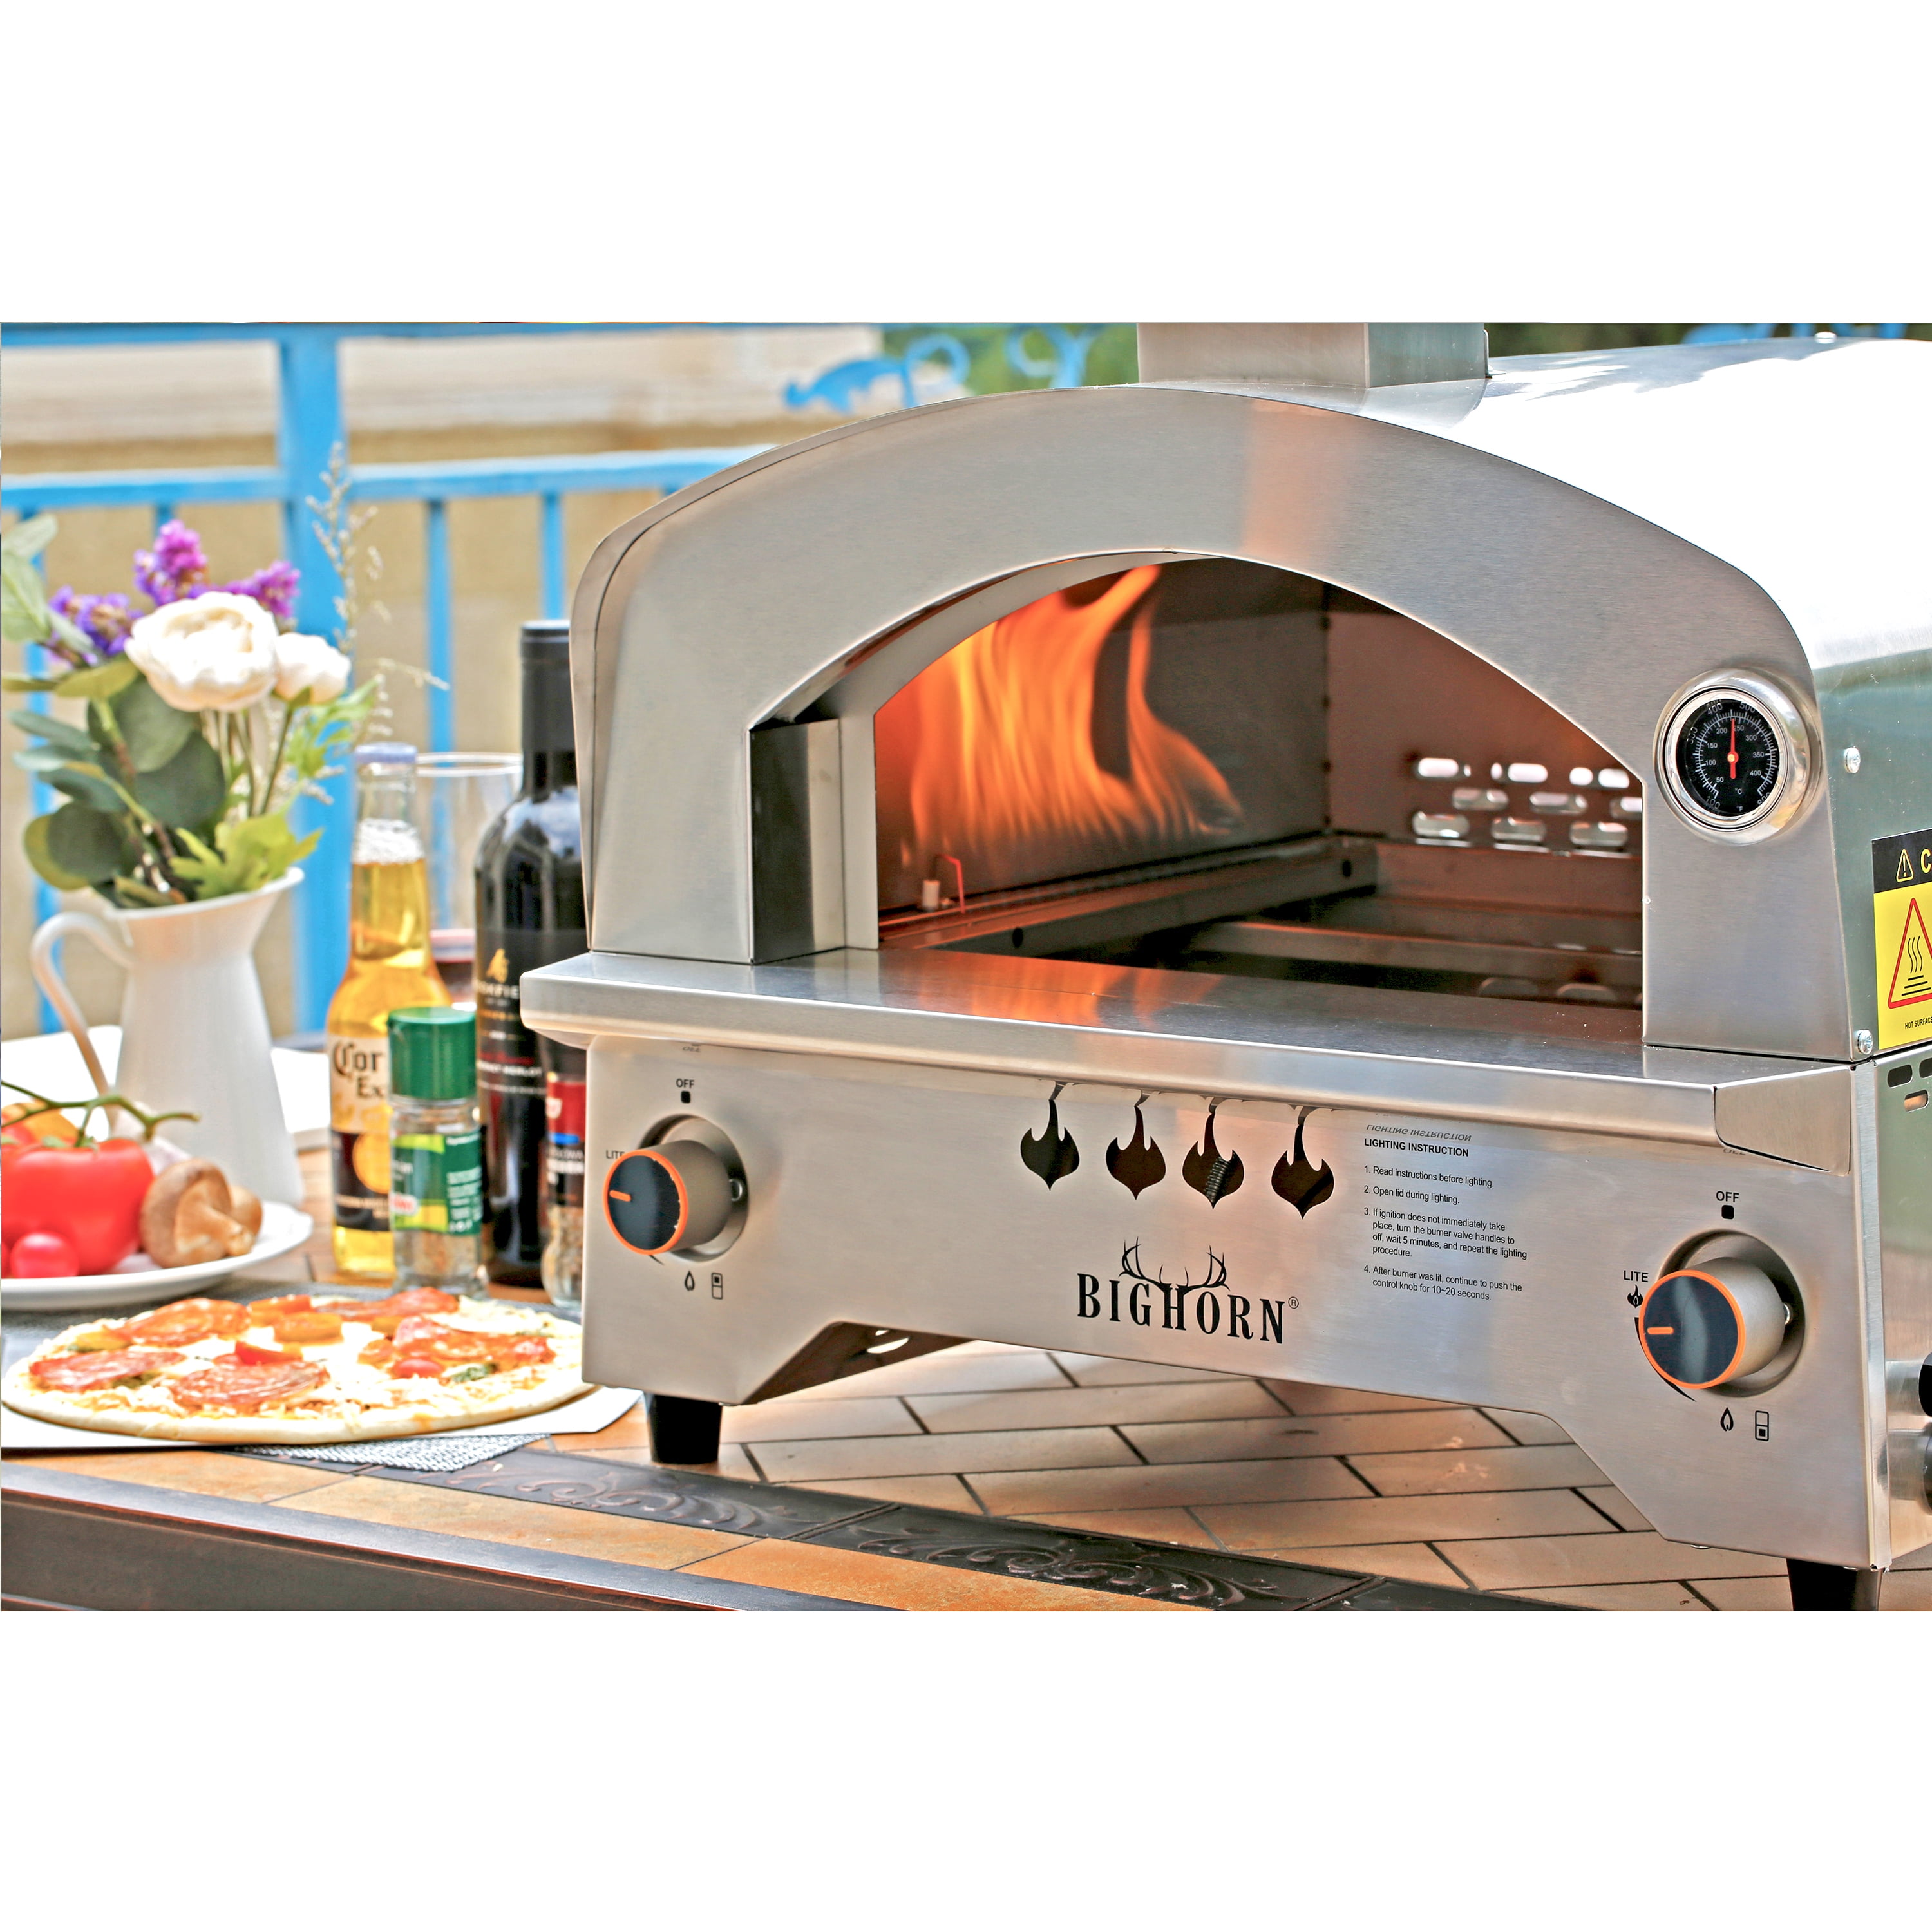 Portable Baking Oven Gas Burner Outdoor Camping Cooking Machine Grill Gas  Stove Pizza Oven Cooker Horno Pizza Electrico